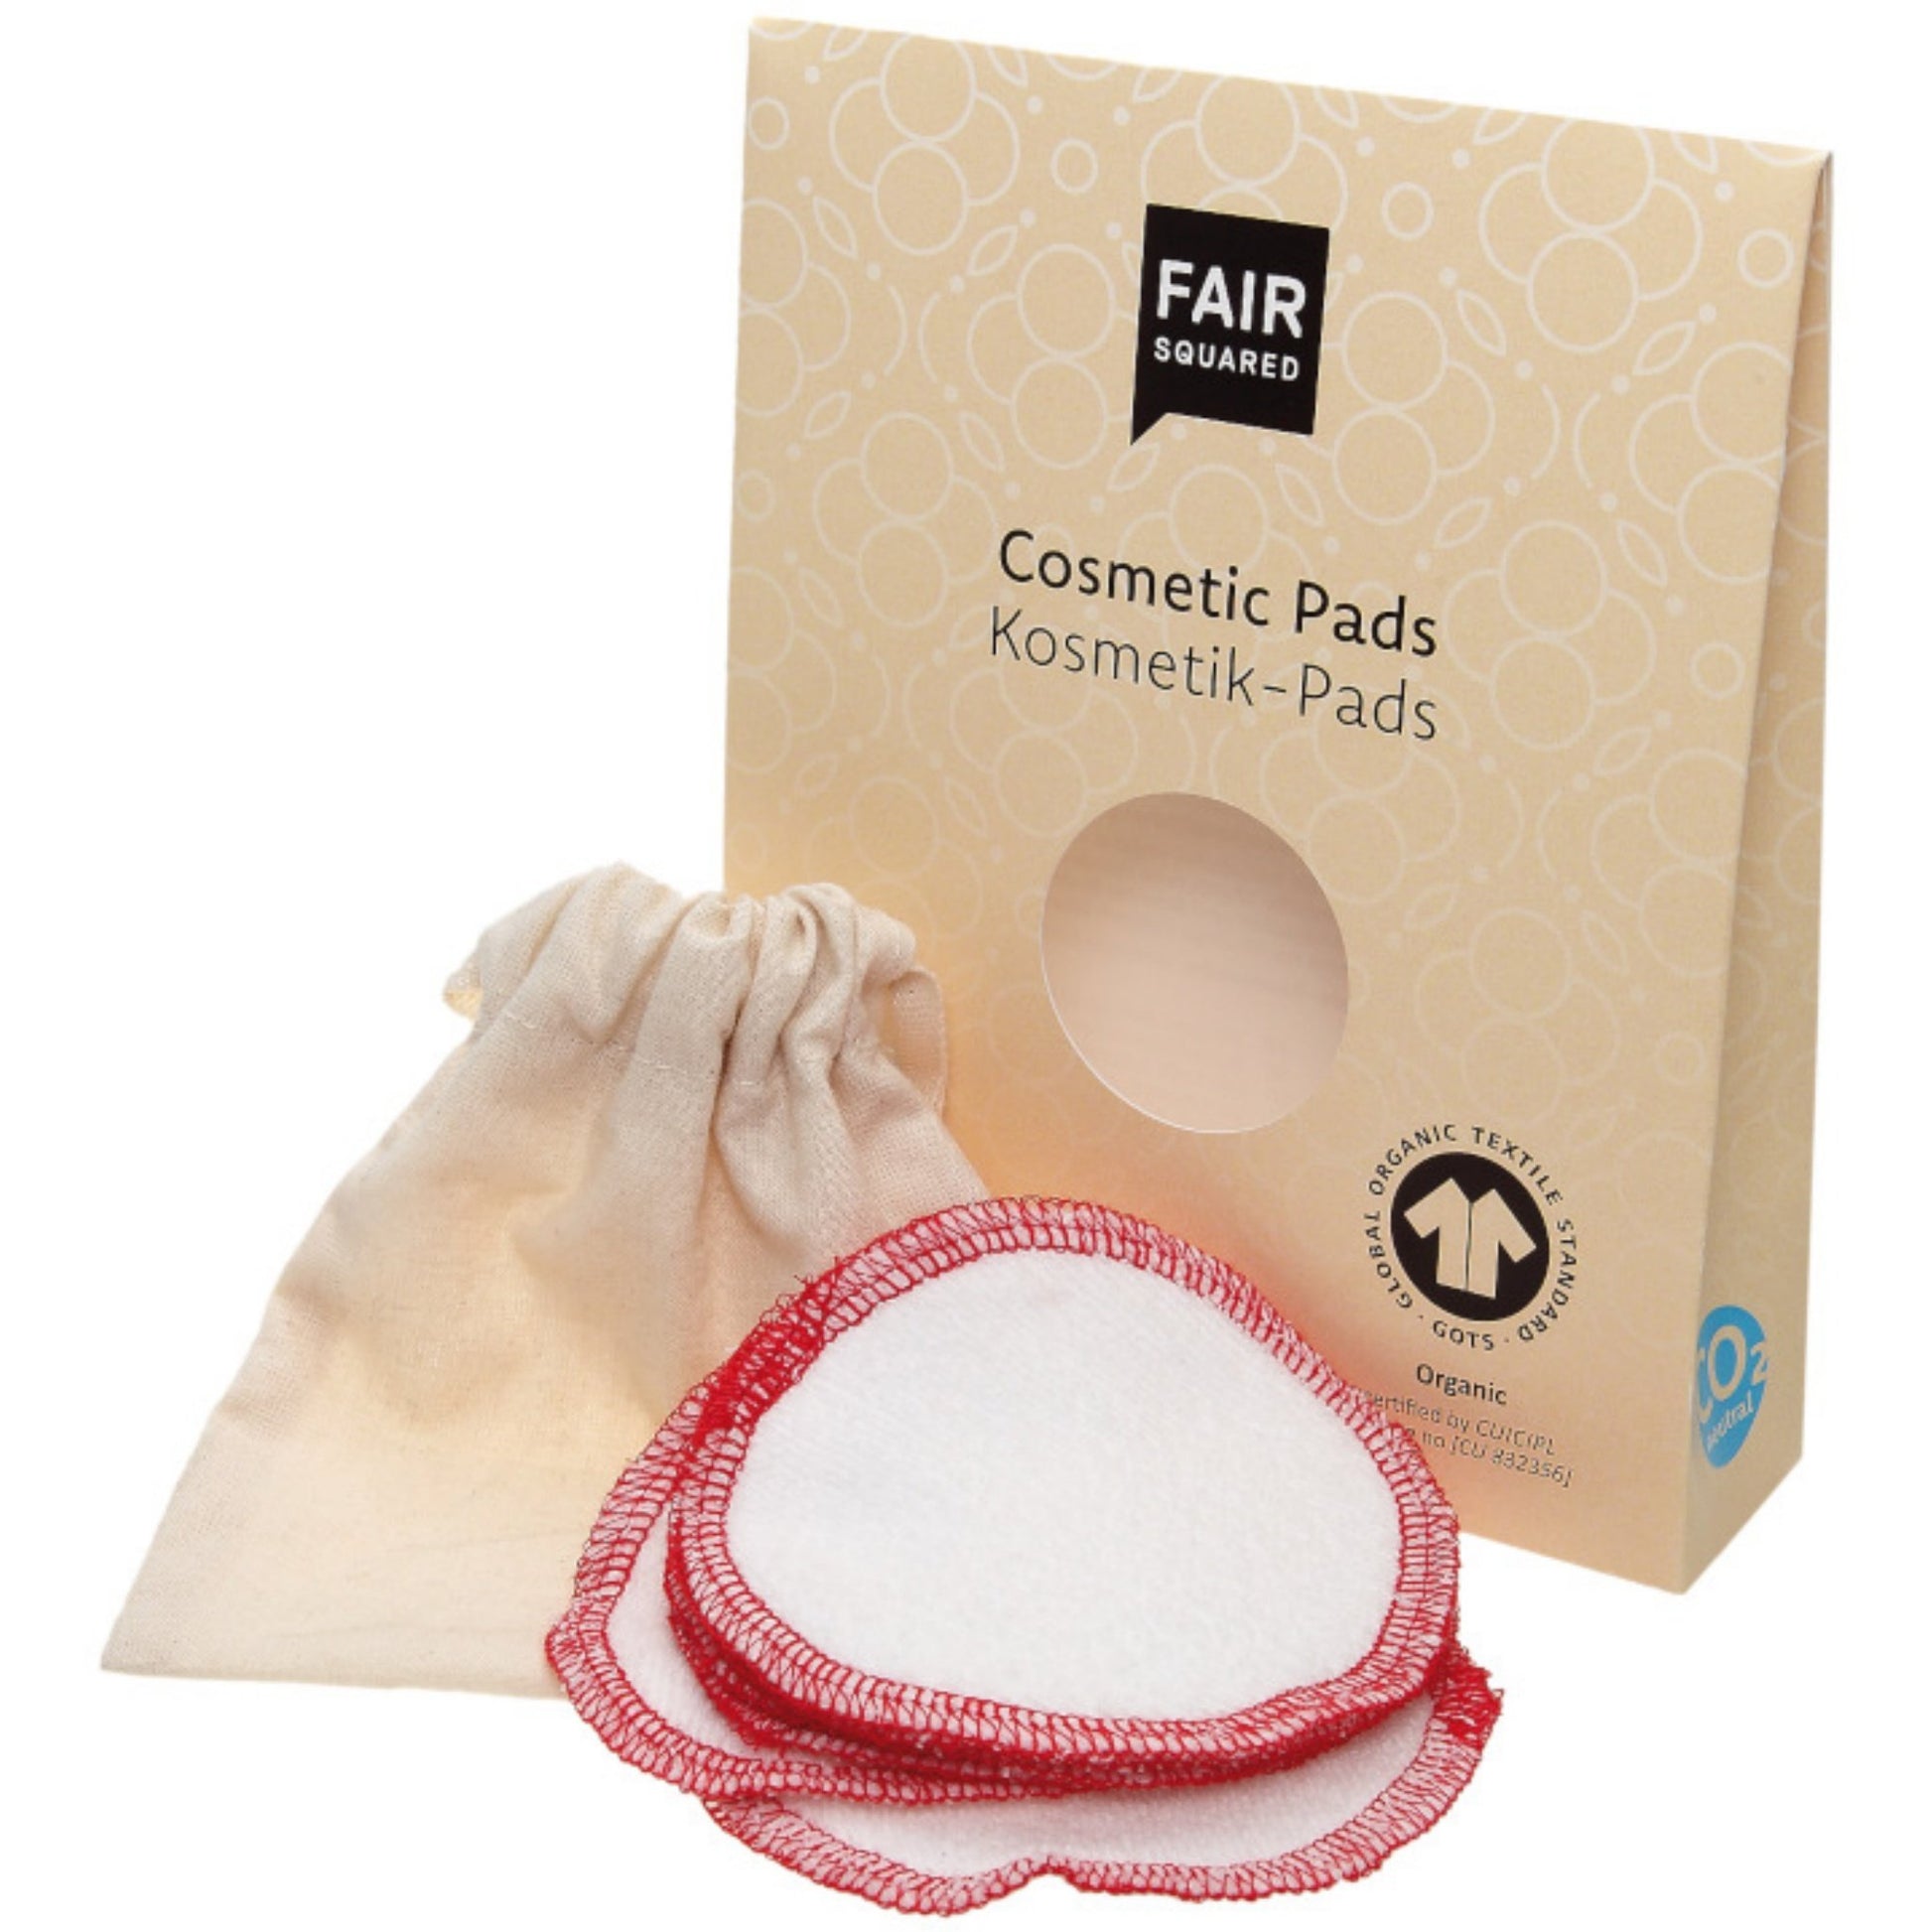 FAIR SQUARED Cosmetic Pads | Reusable Fairtrade Organic Cotton Zero Waste Makeup Remover Pads | BeoVERDE.ie